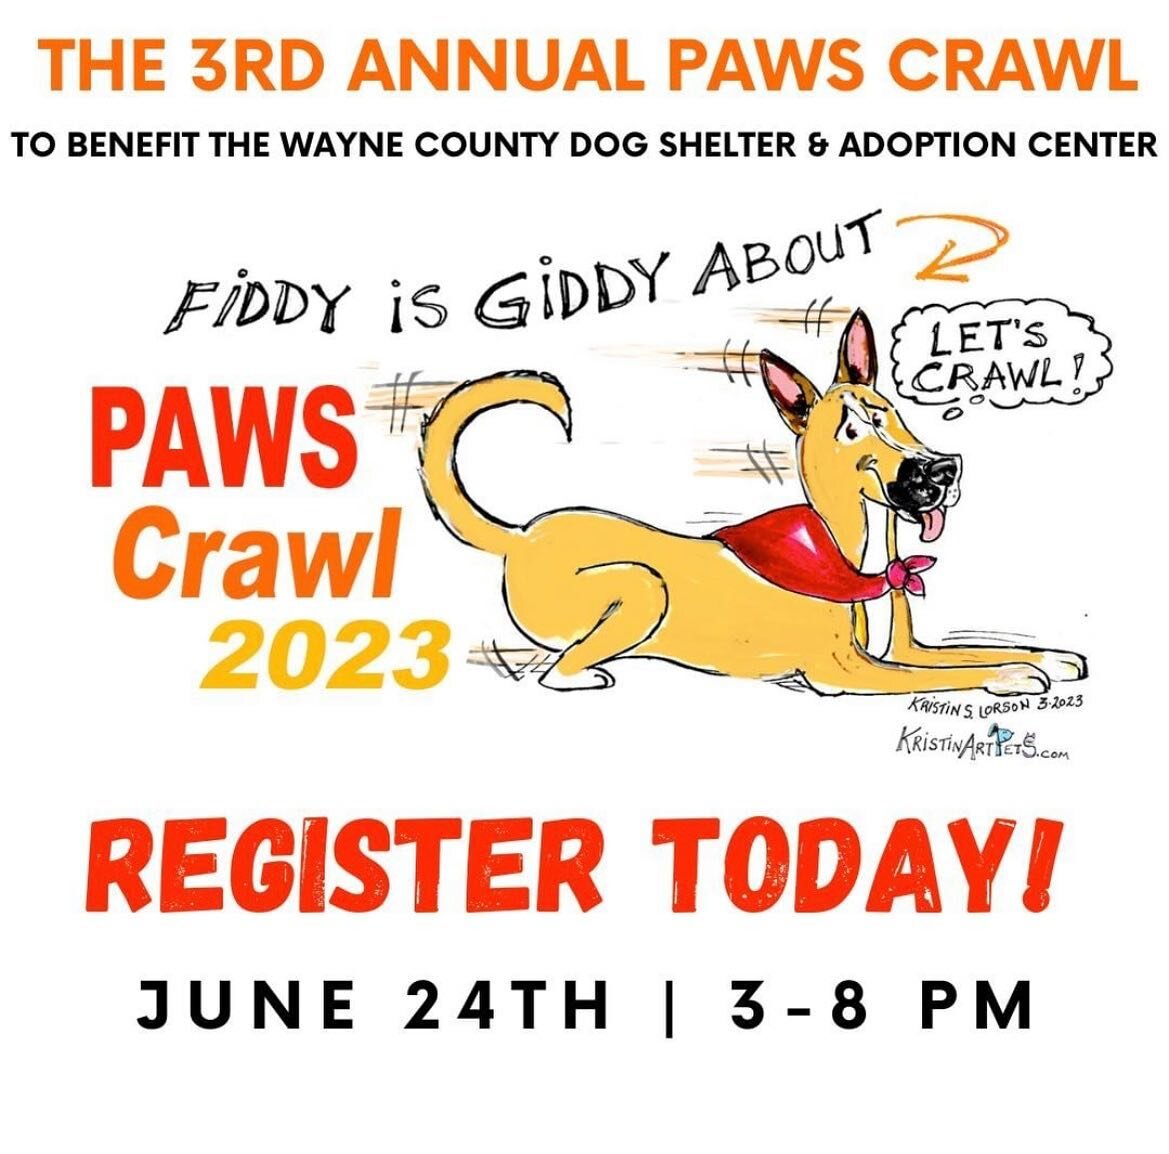 We&rsquo;re playing at the 3rd Annual PAWS Crawl on June 24th from 5-8 PM! We&rsquo;re so excited to be involved with this amazing event that benefits the Wayne County Dog Shelter &amp; Adoption Center. To purchase tickets and learn more, visit @wayn